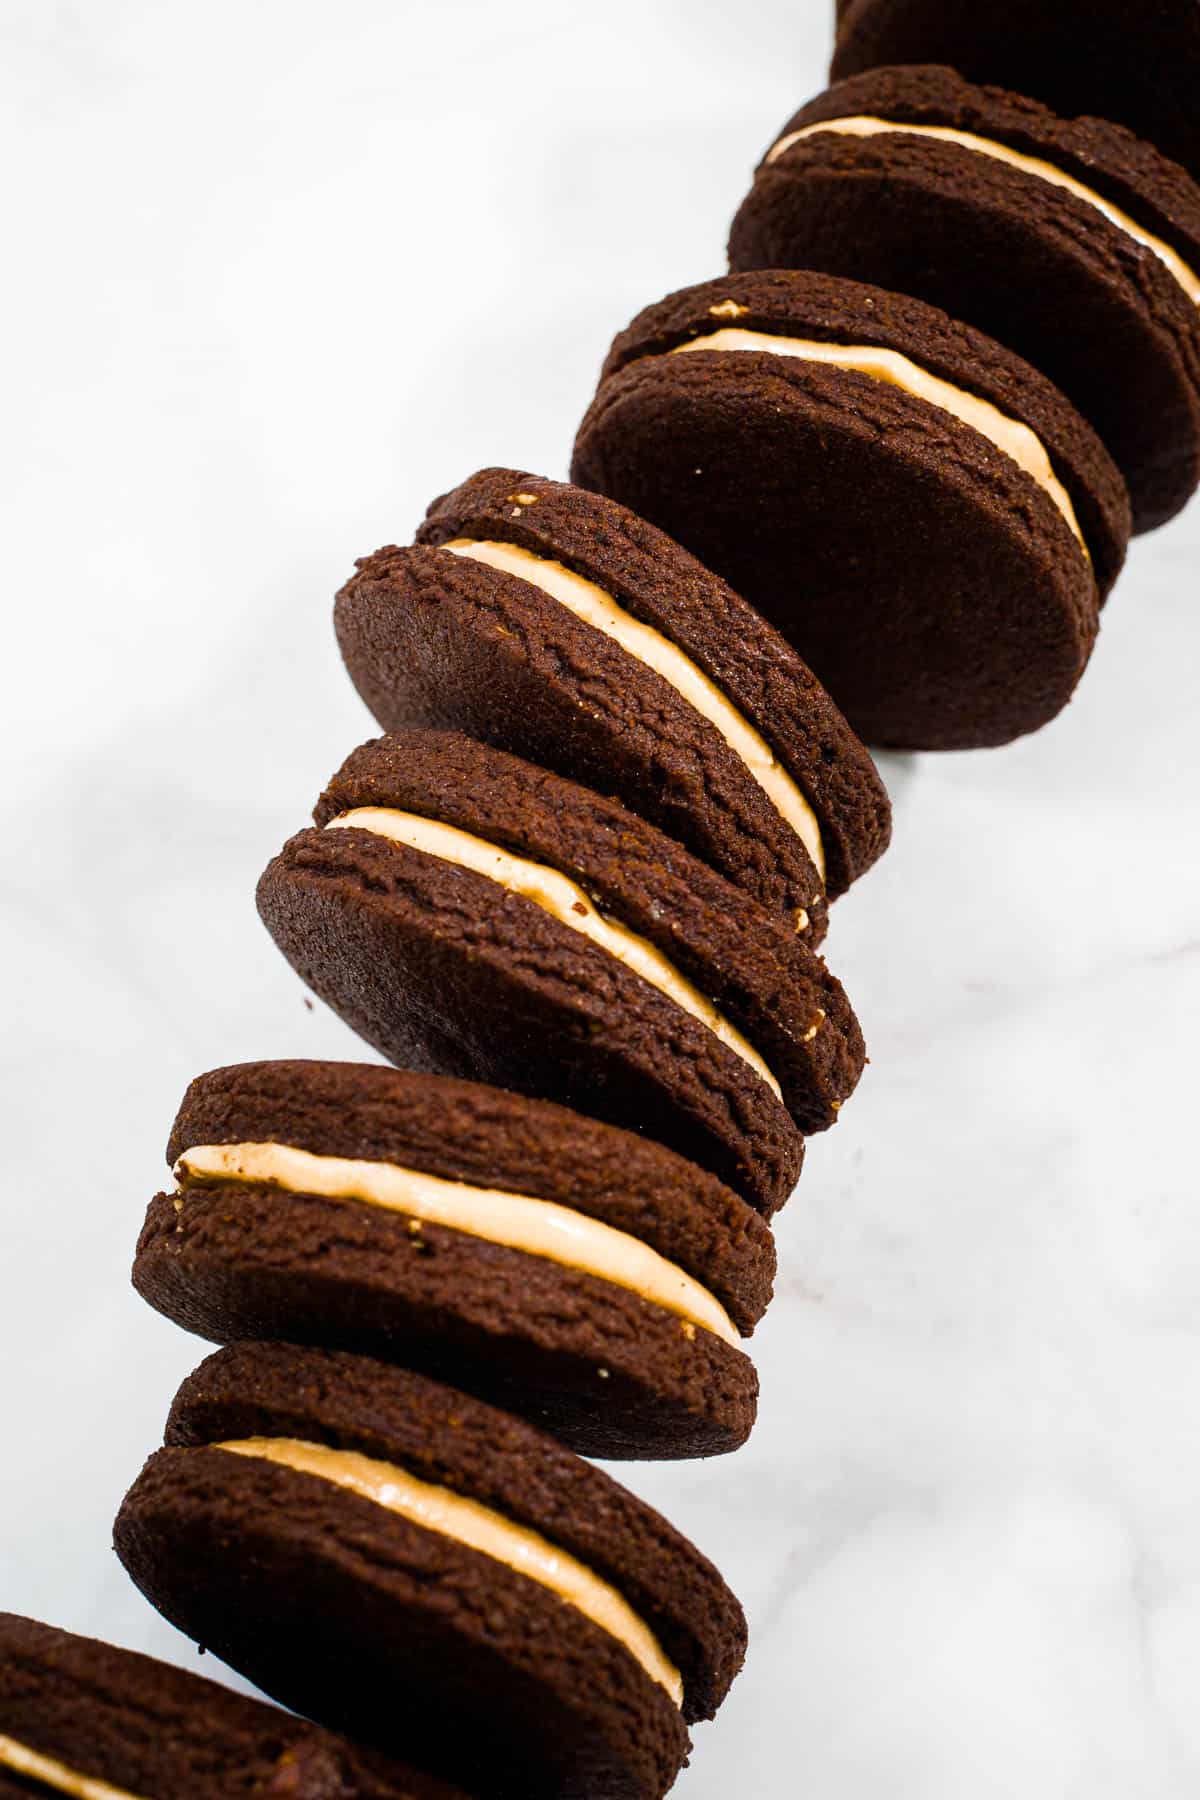 Chocolate sandwich cookies in a row.